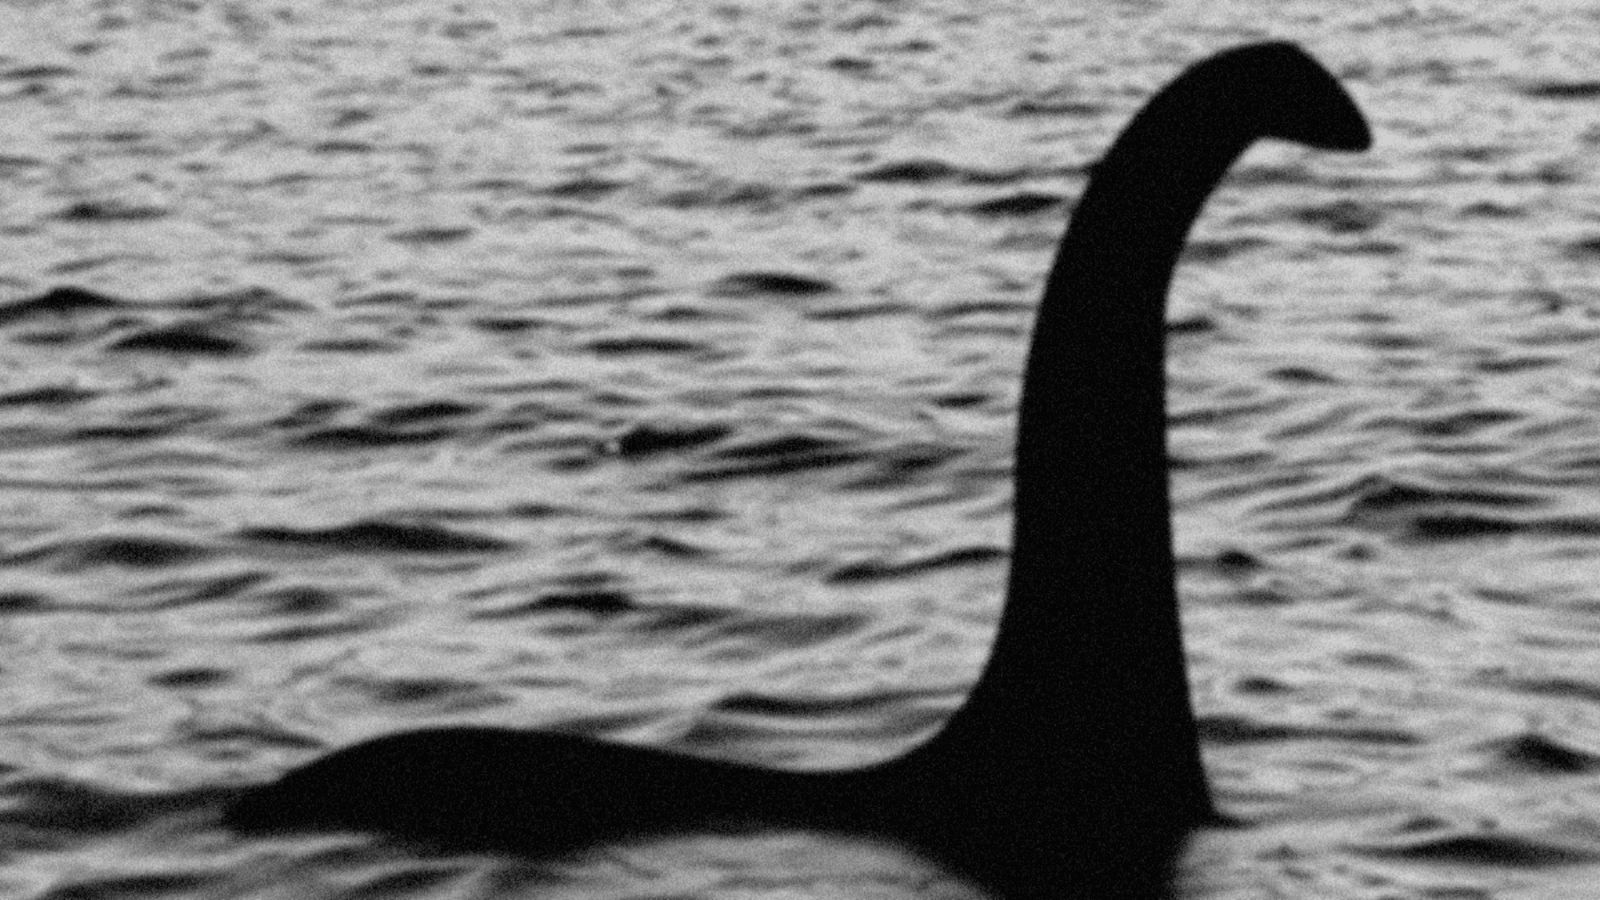 NASA called upon for Loch Ness monster hunt